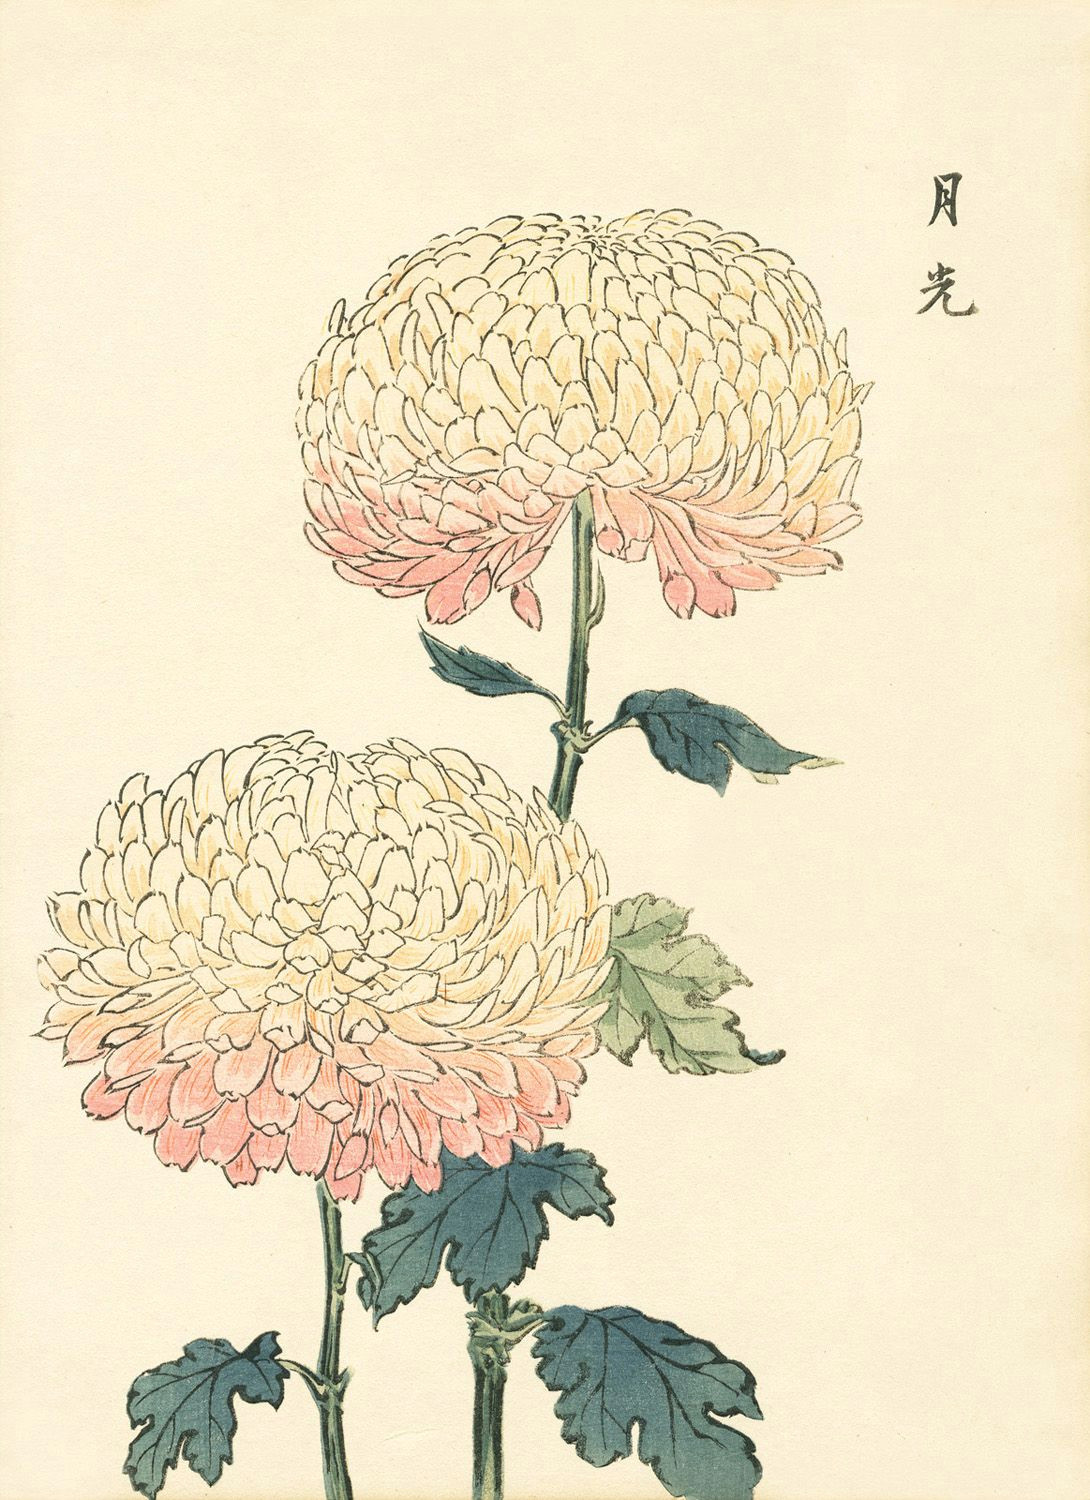 Drawings Of Chinese Flowers Flowers asian Art Illustrations Pinterest Art Prints and